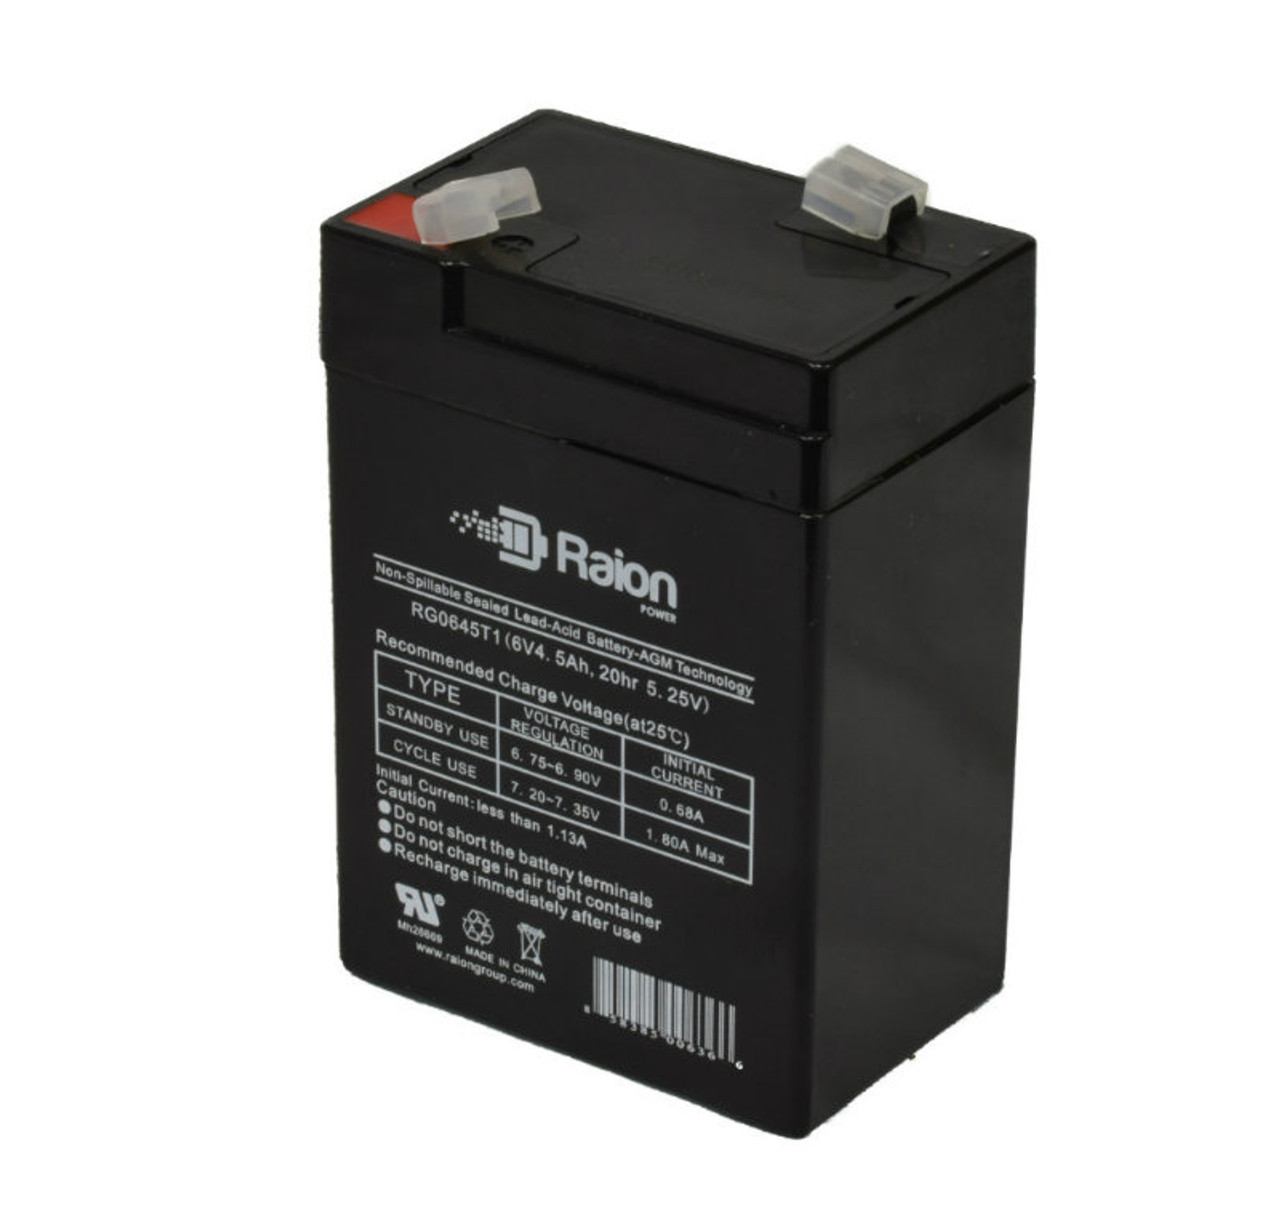 Raion Power RG0645T1 6V 4.5Ah Replacement Battery Cartridge for SeaWill SW660